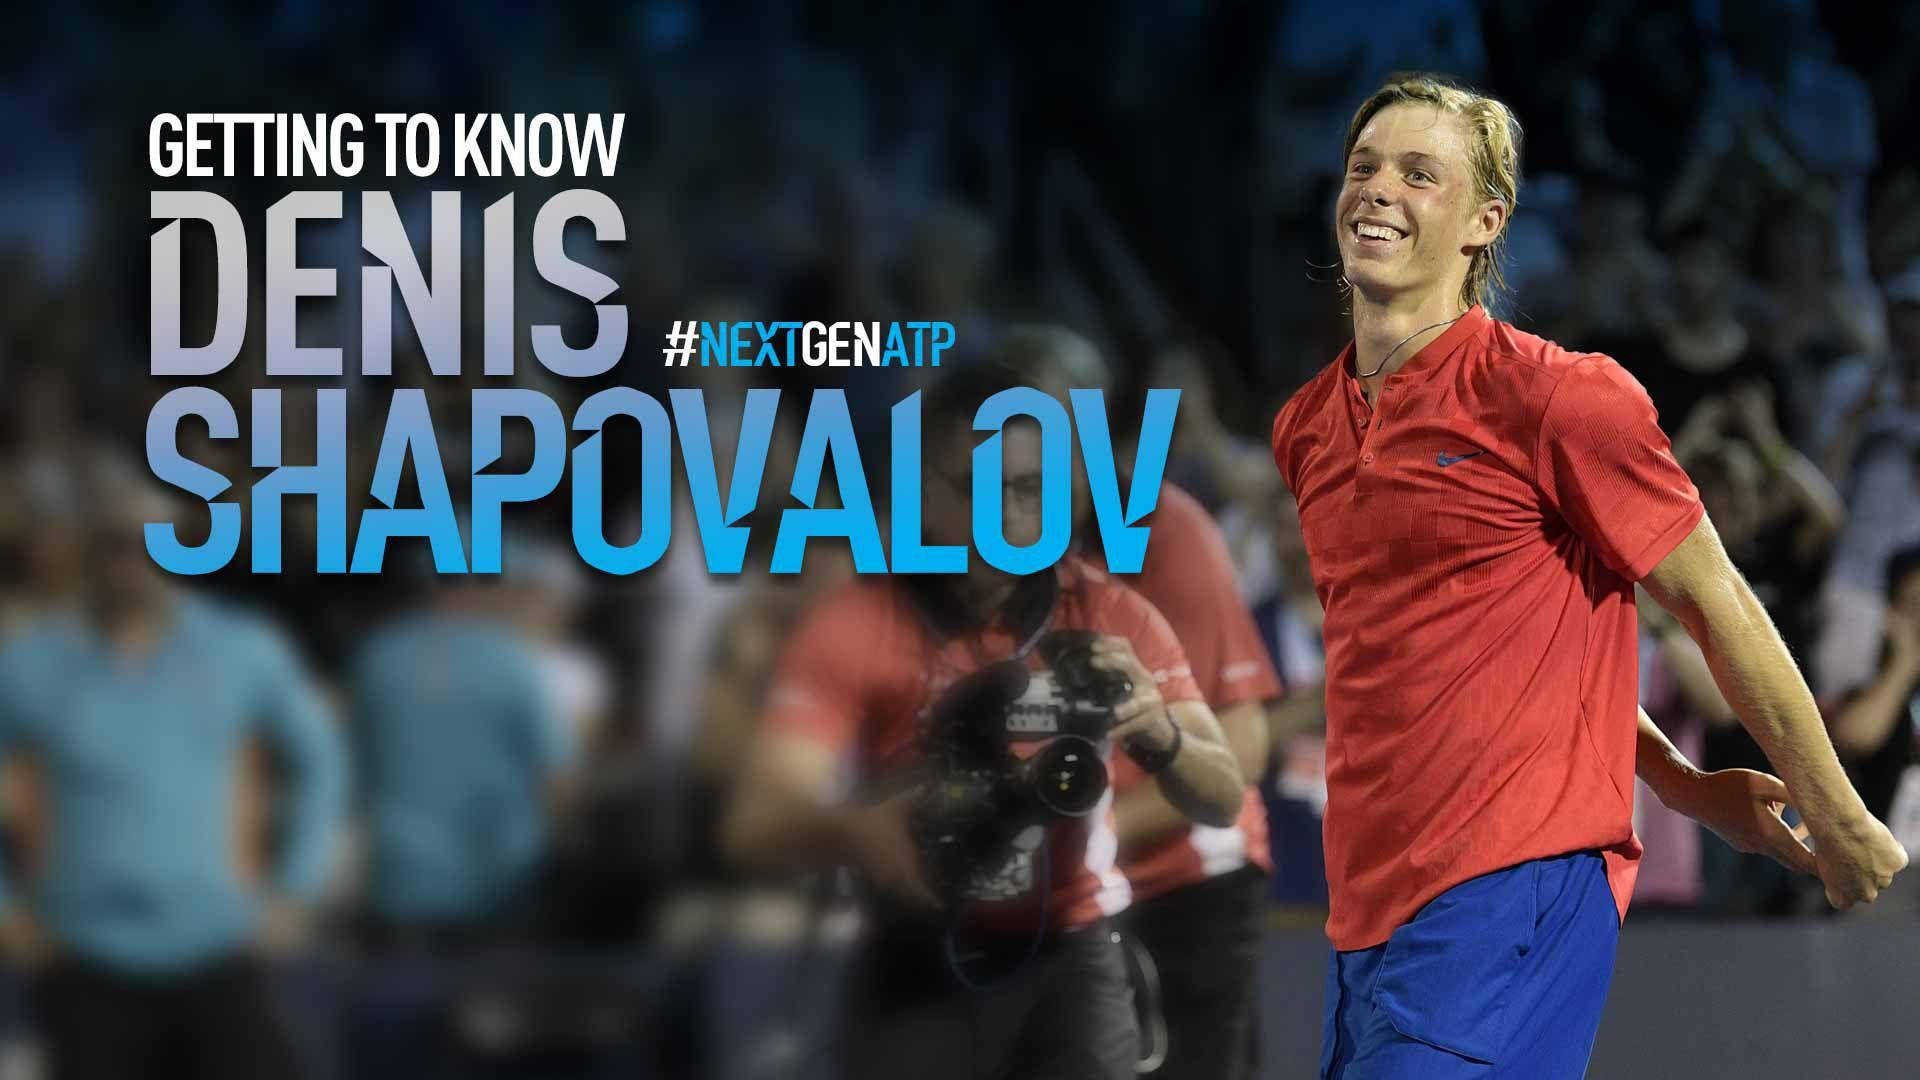 Denis Shapovalov In Action On The Tennis Court Background